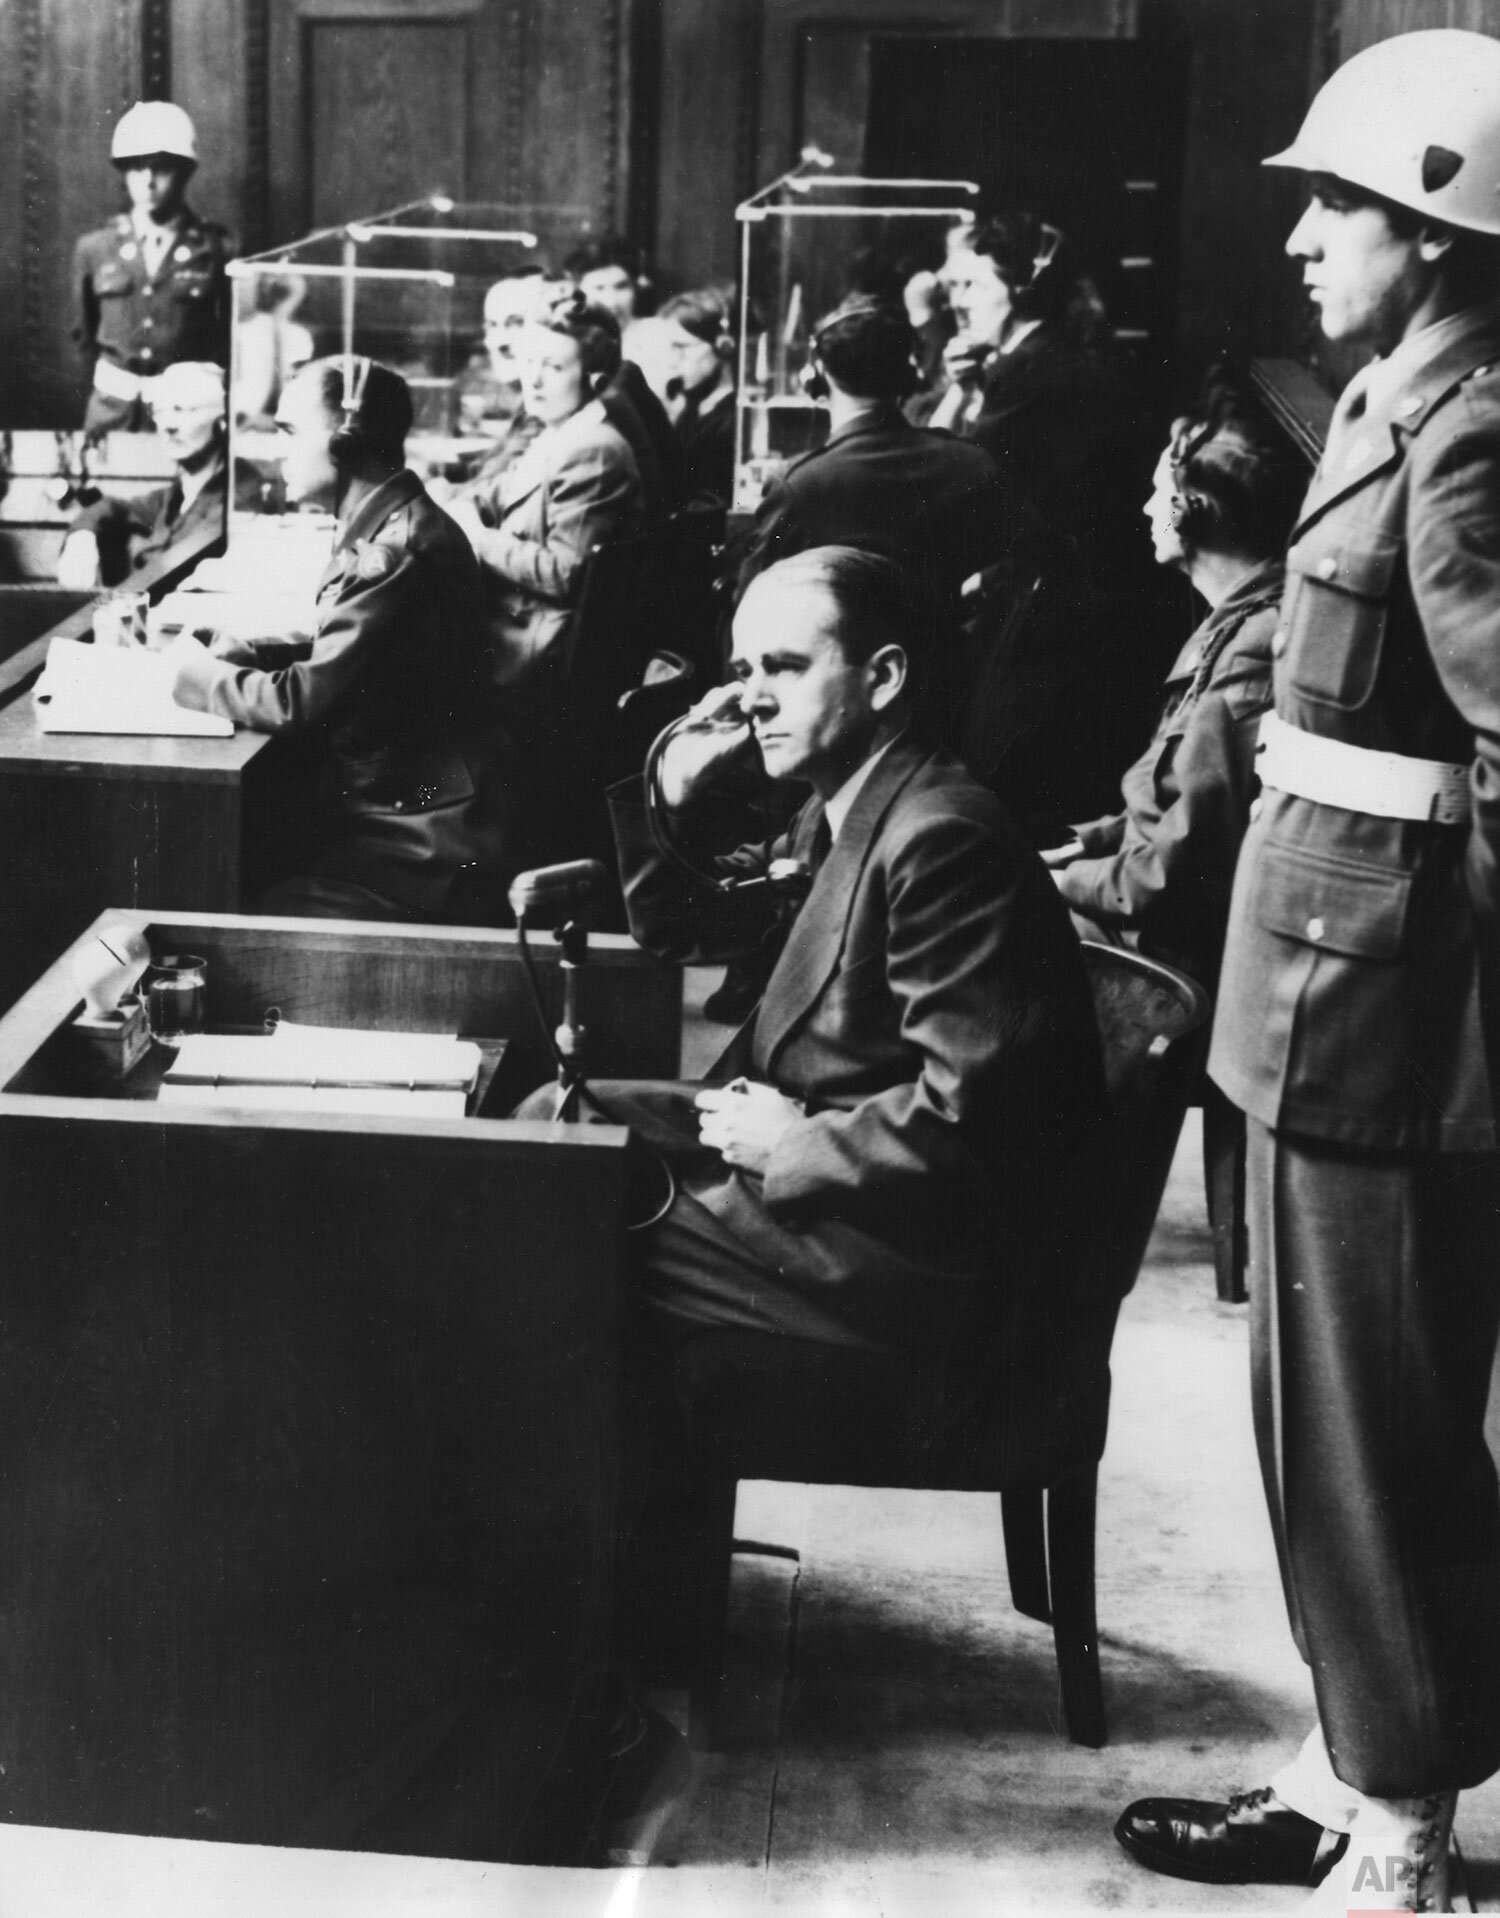  Albert Speer, Hitler's former architect and armament minister during WW II, a defendant in the war crimes trial at Nuremberg, Germany is pictured in court in Nuremberg, September 12, 1946. (AP Photo) 